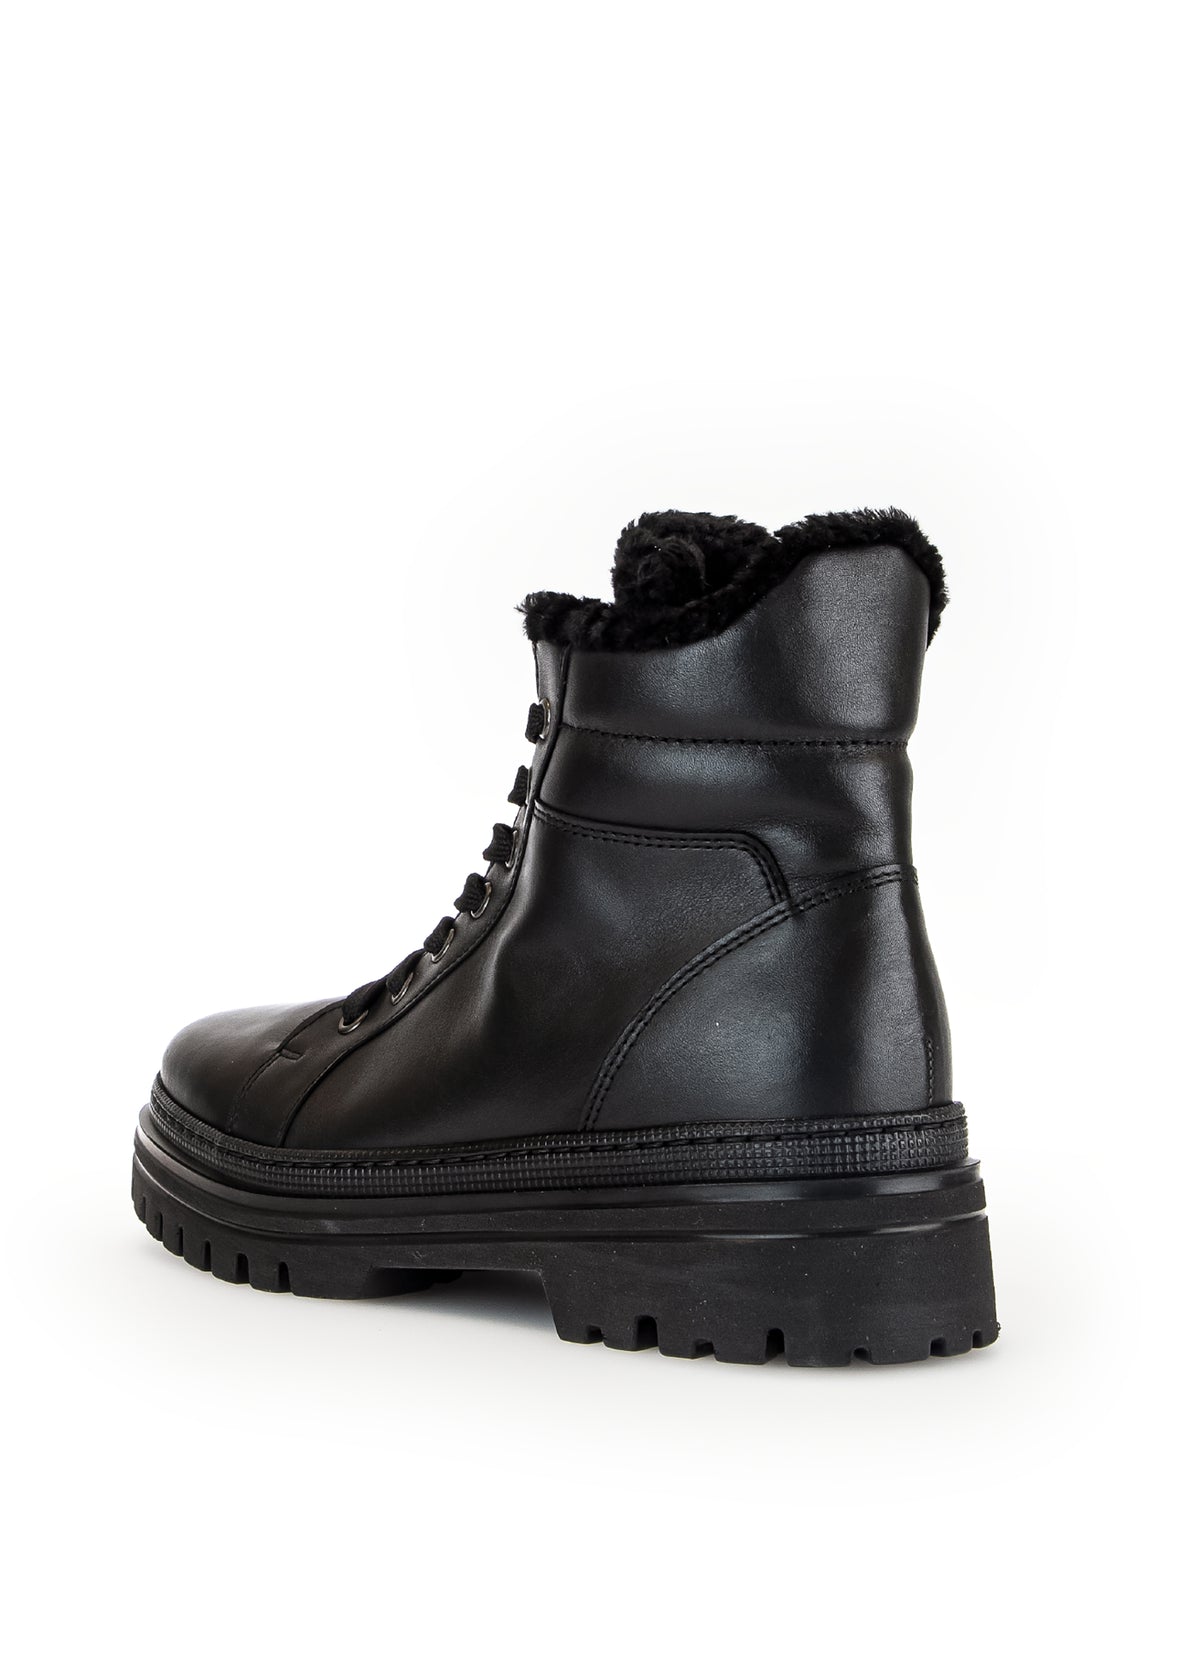 Winter boots with a thick sole - black